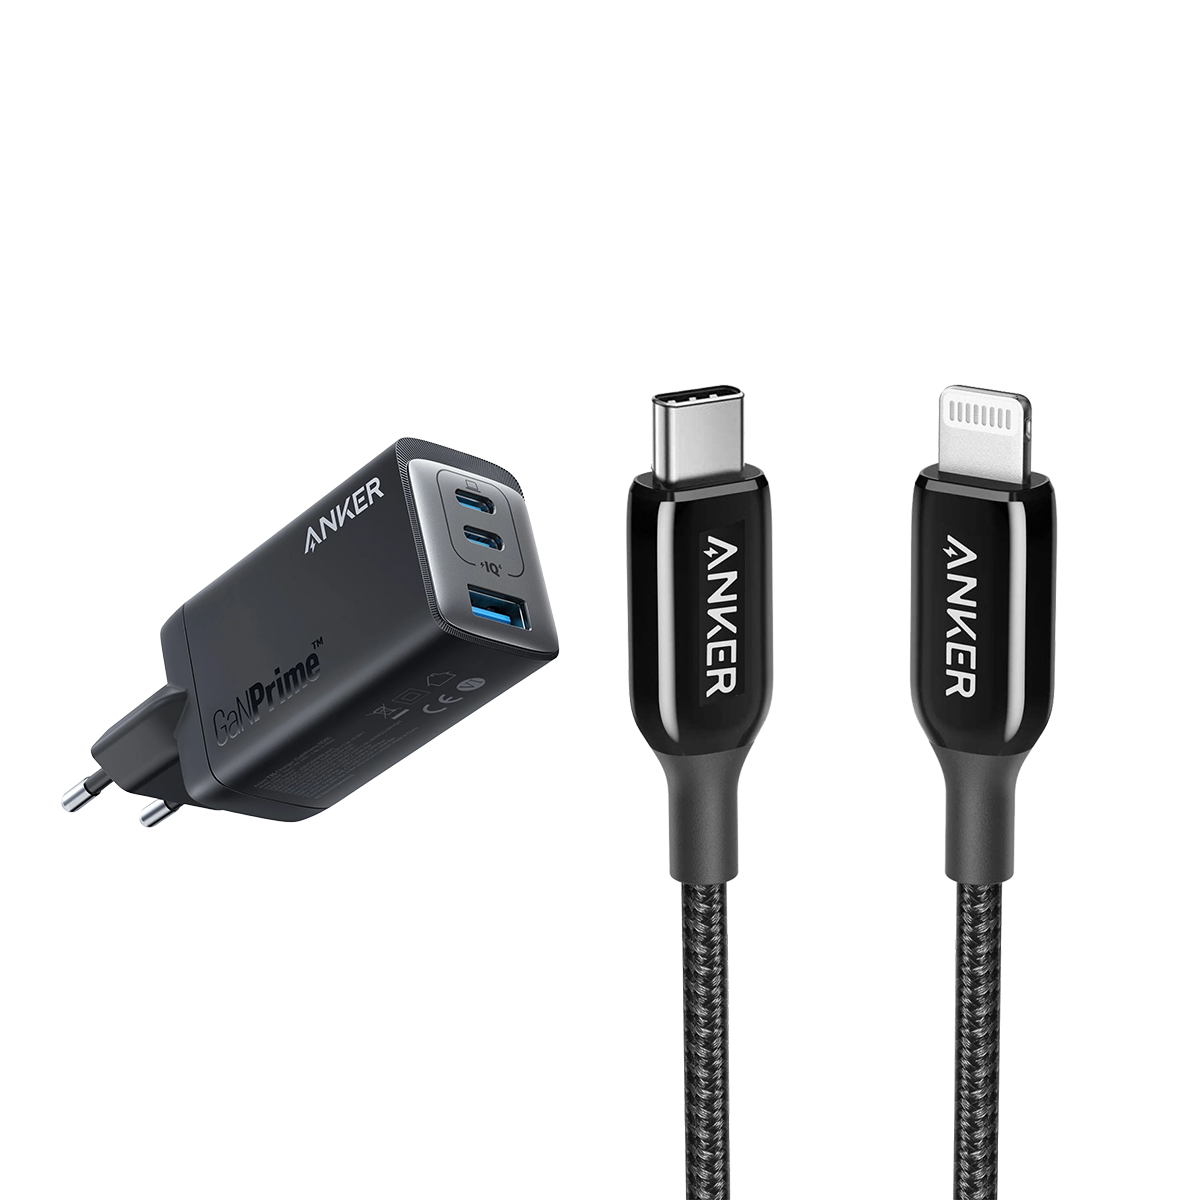 Anker <b>735</b> Charger (GaNPrime 65W) and Anker <b>762</b> USB-C to Lightning Cable (6 ft Nylon)